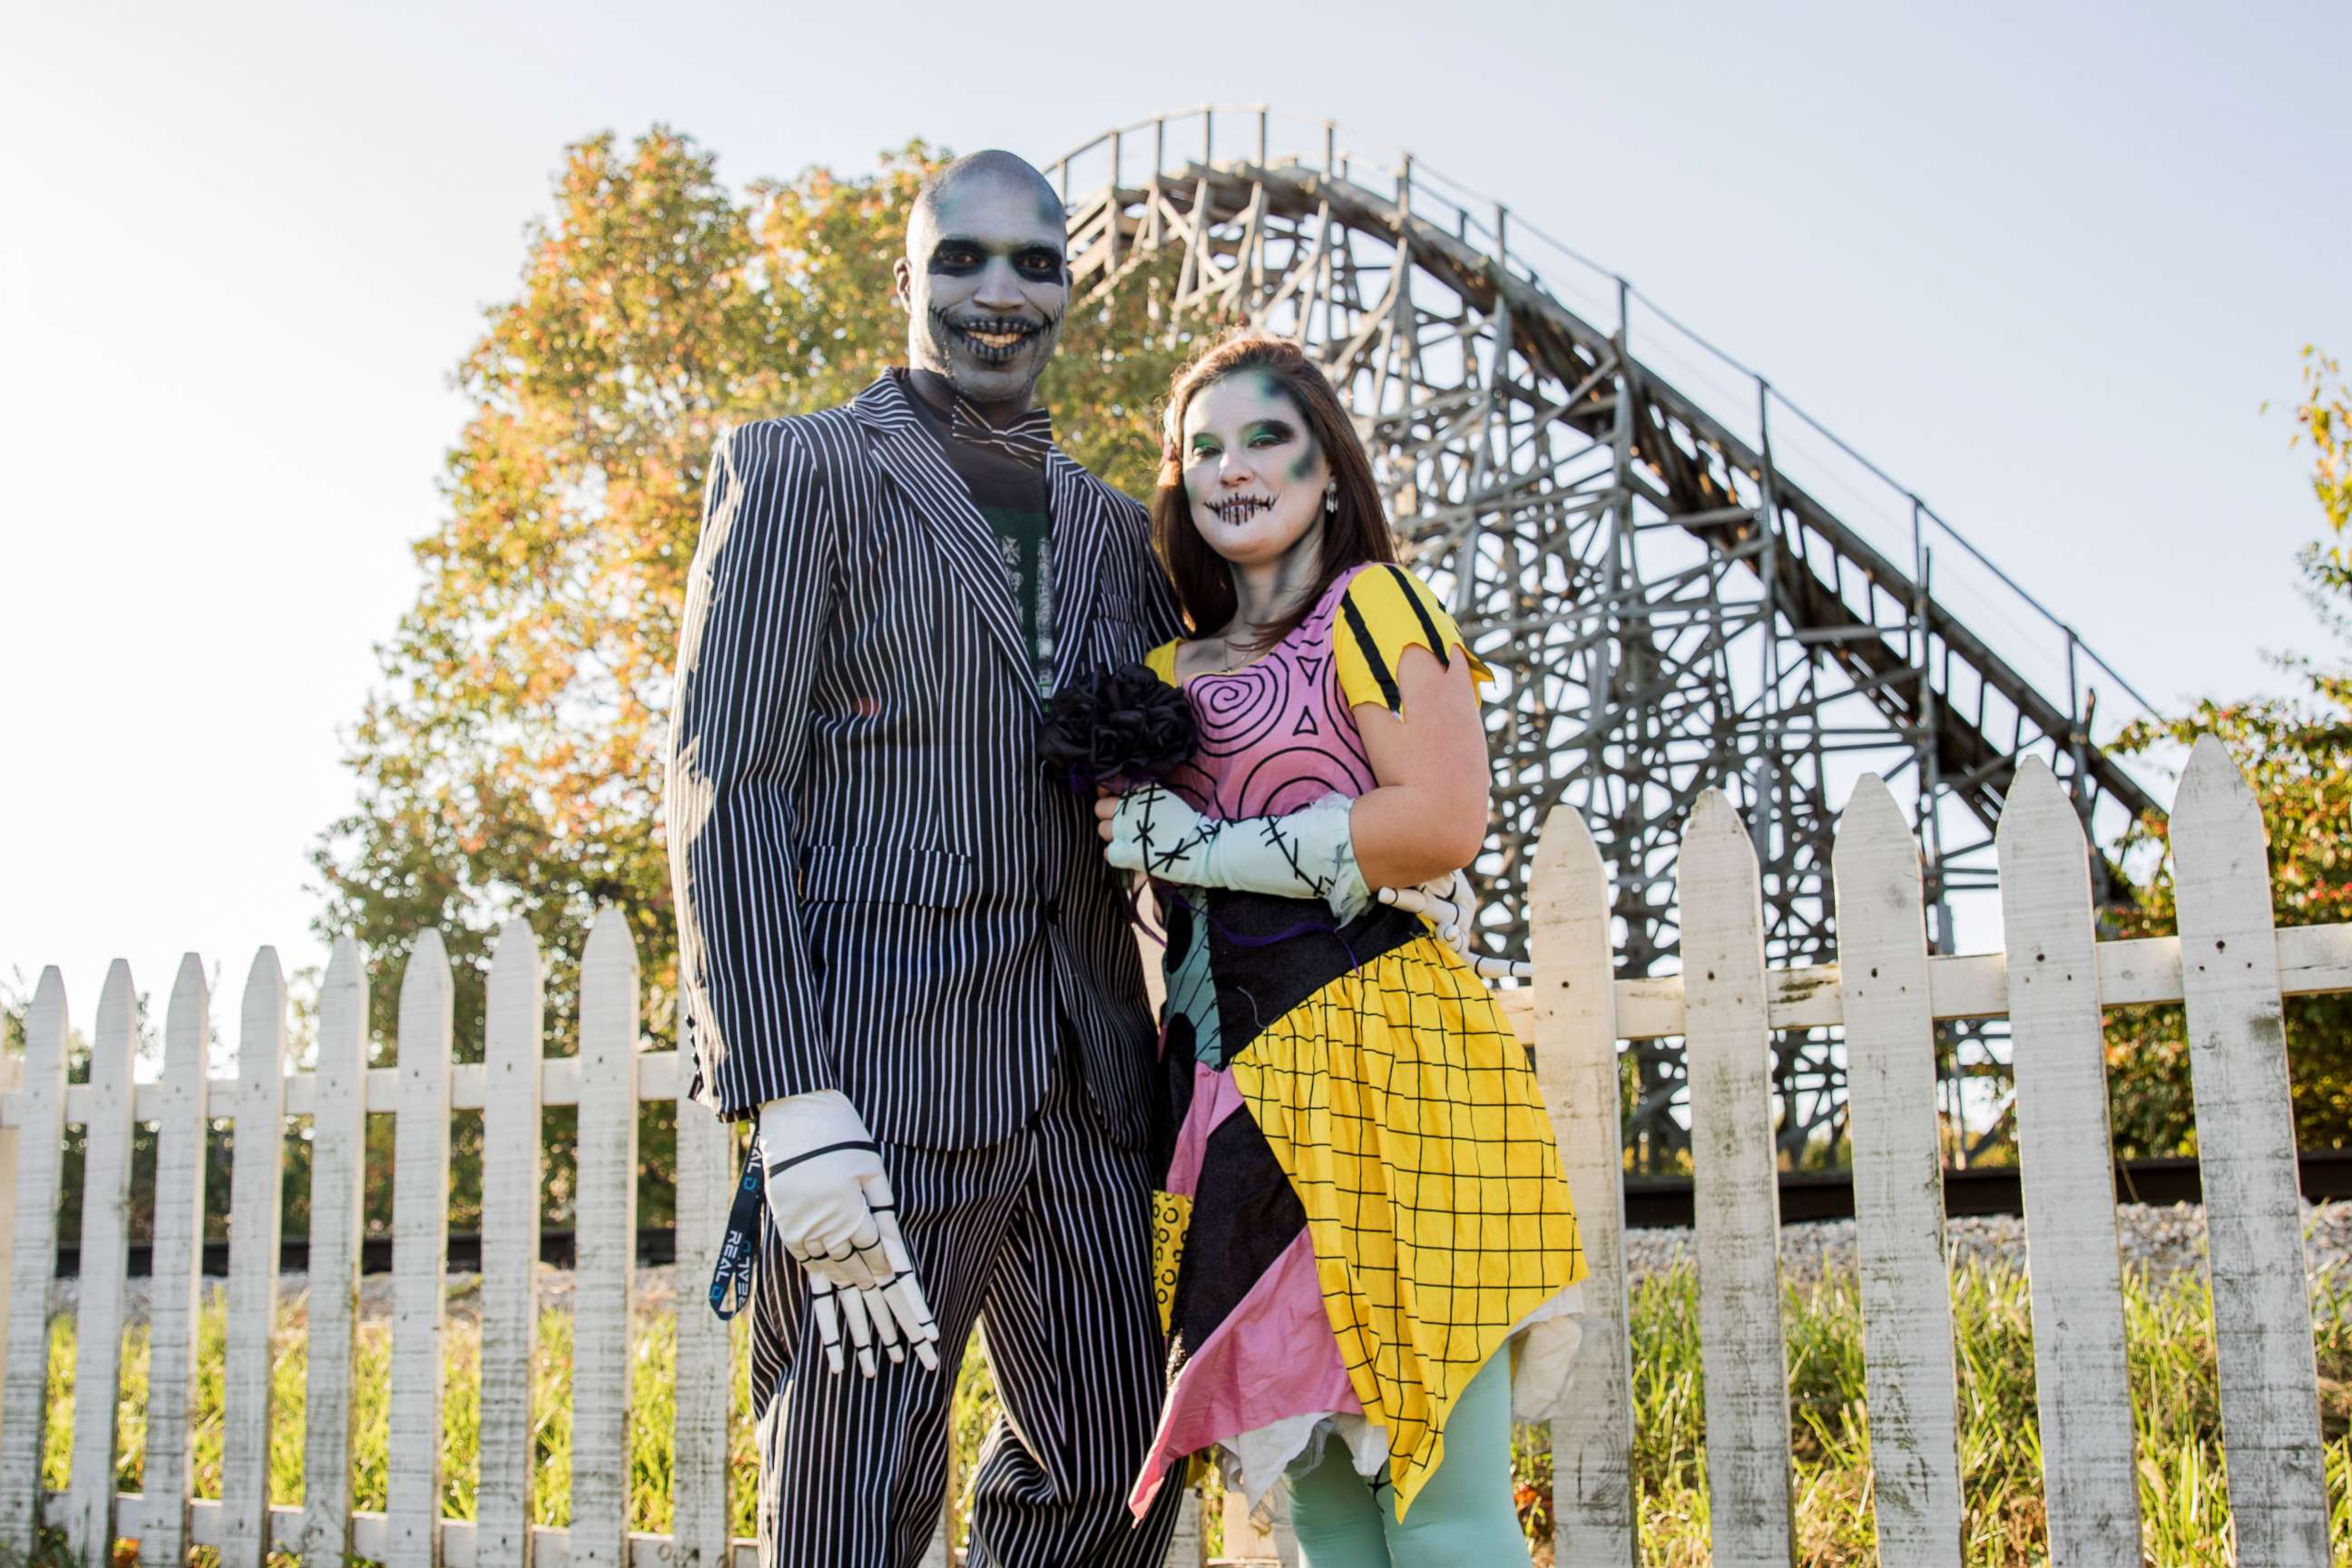 PHOTO: Shelby Waid-Johnson and George Johnson of Quincy, Ill. said getting married on Friday the 13th "meant a lot" because Halloween is their favorite holiday. 